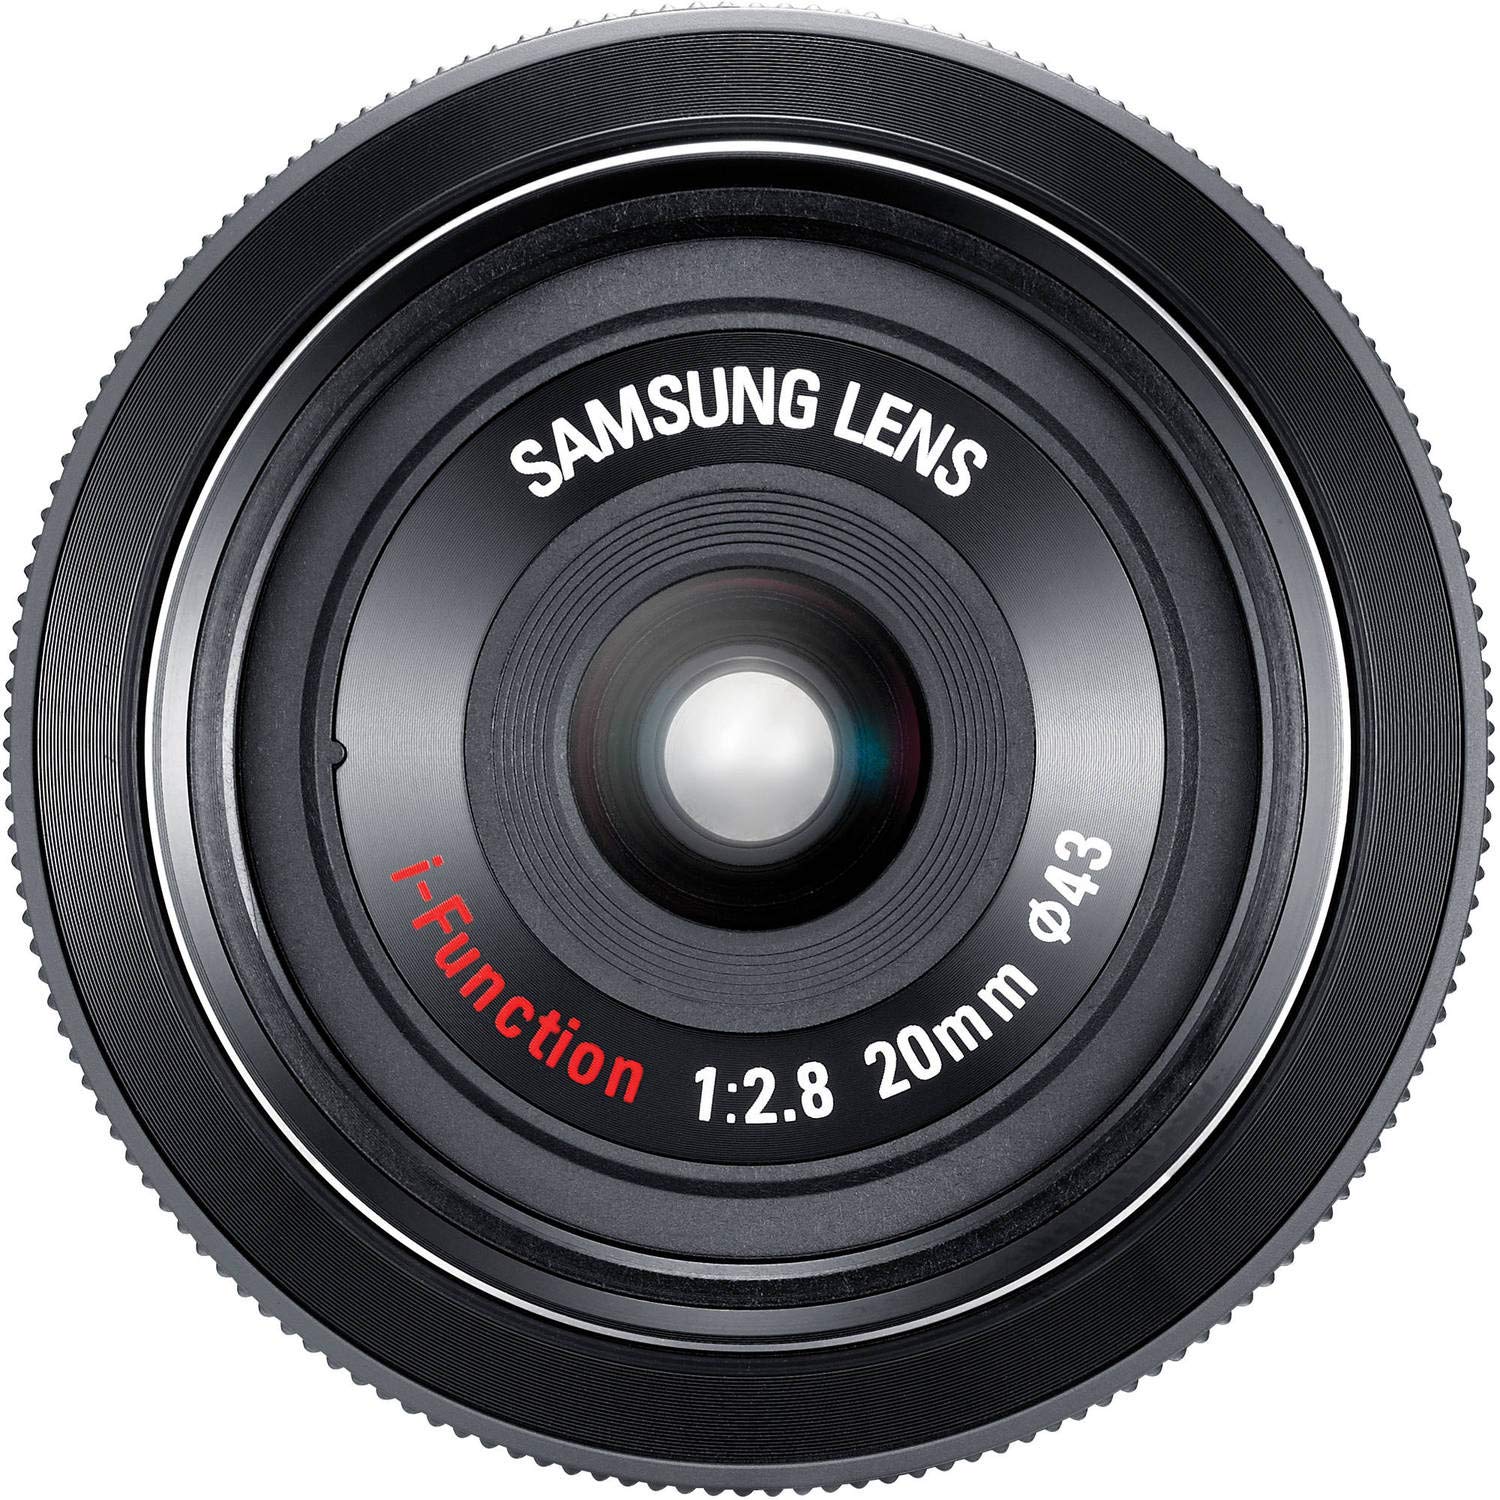 Samsung 20mm f/2.8 Pancake Lens for NX10 / NX100 (Black) with Pro Filter (Renewed) - Reconditioned